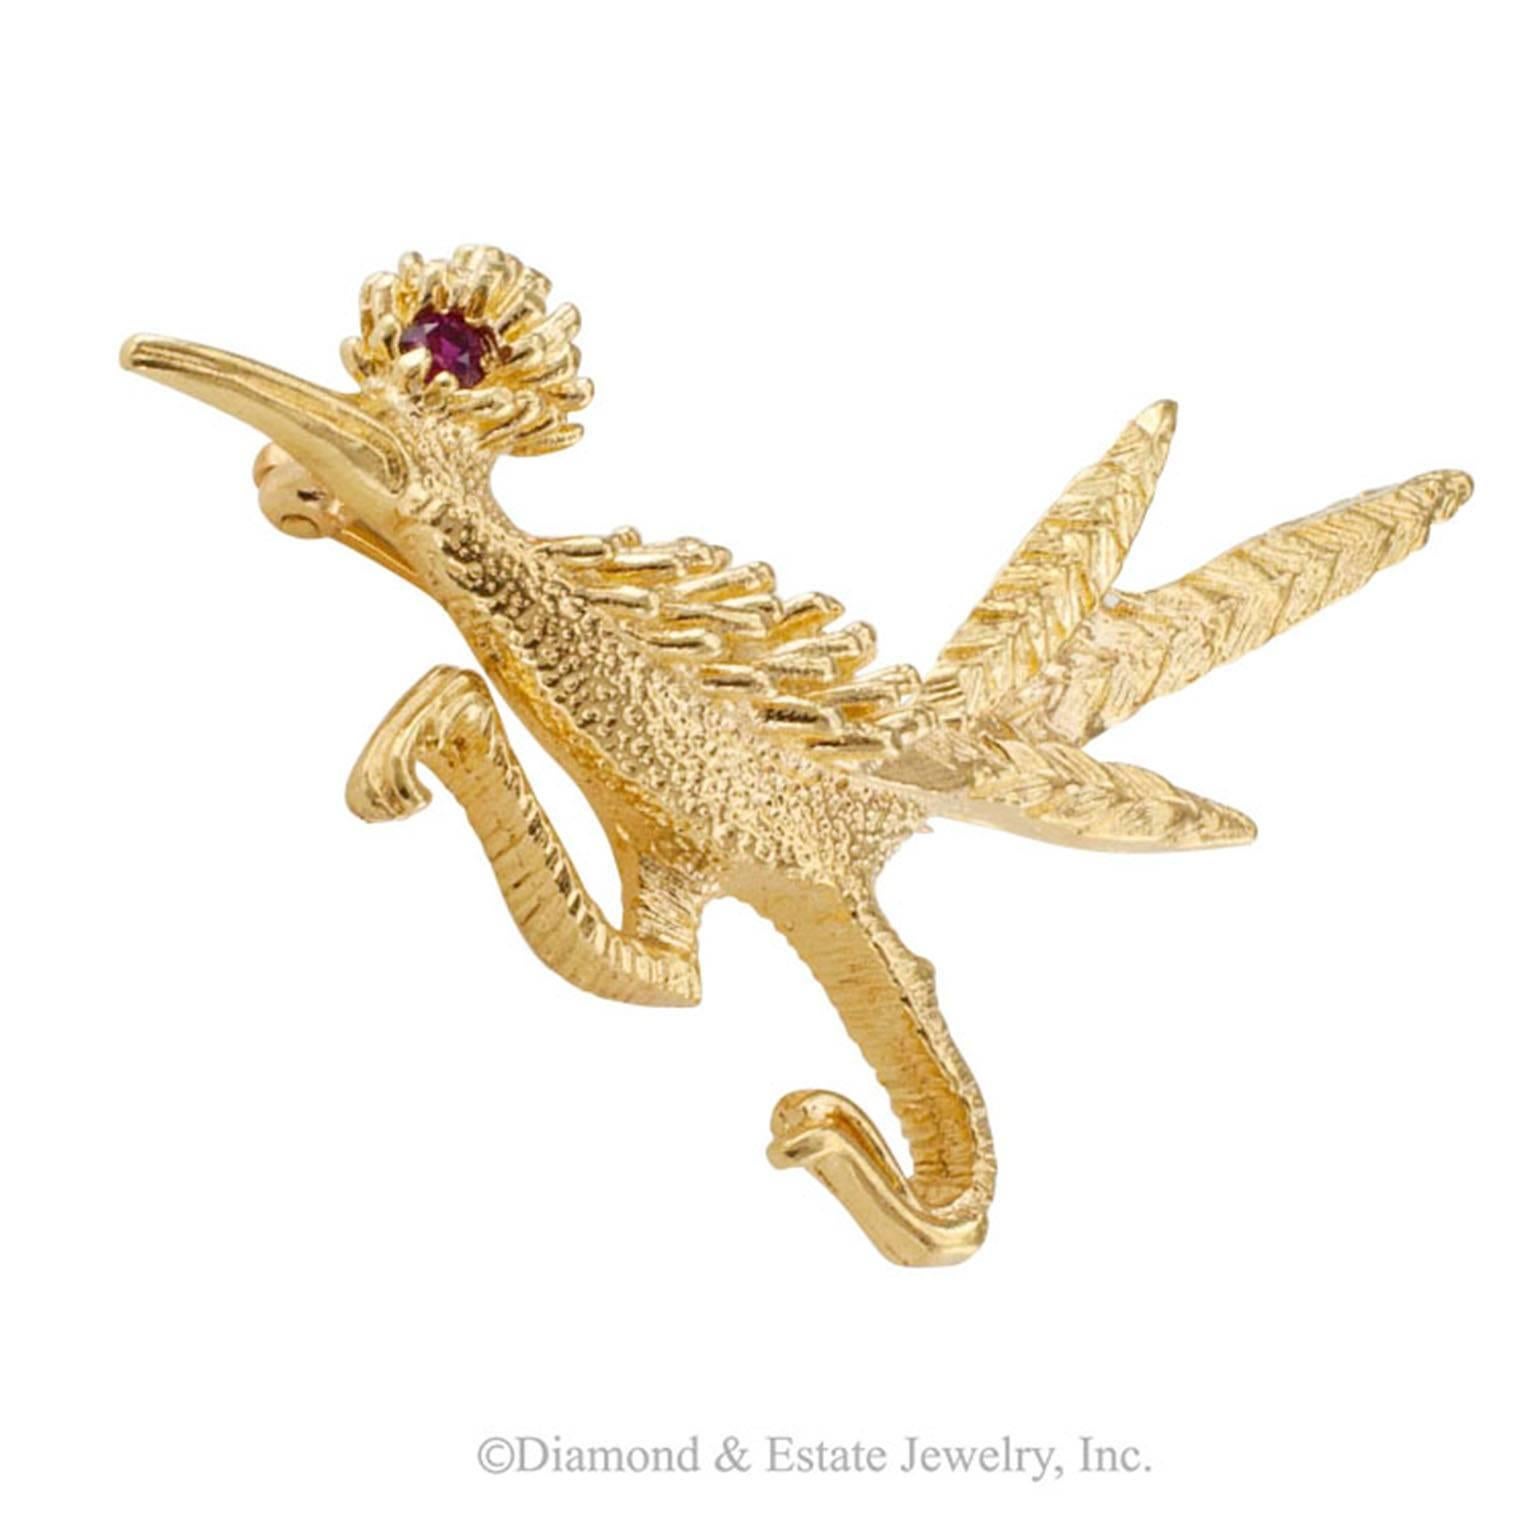 Road Runner 14-karat Gold and Ruby Brooch

1970s 14-karat yellow gold road runner brooch with ruby eye.  The whimsical design captures the agile spirit of the graceful road runner bird.  In real life, they are simply captivating... so expressive